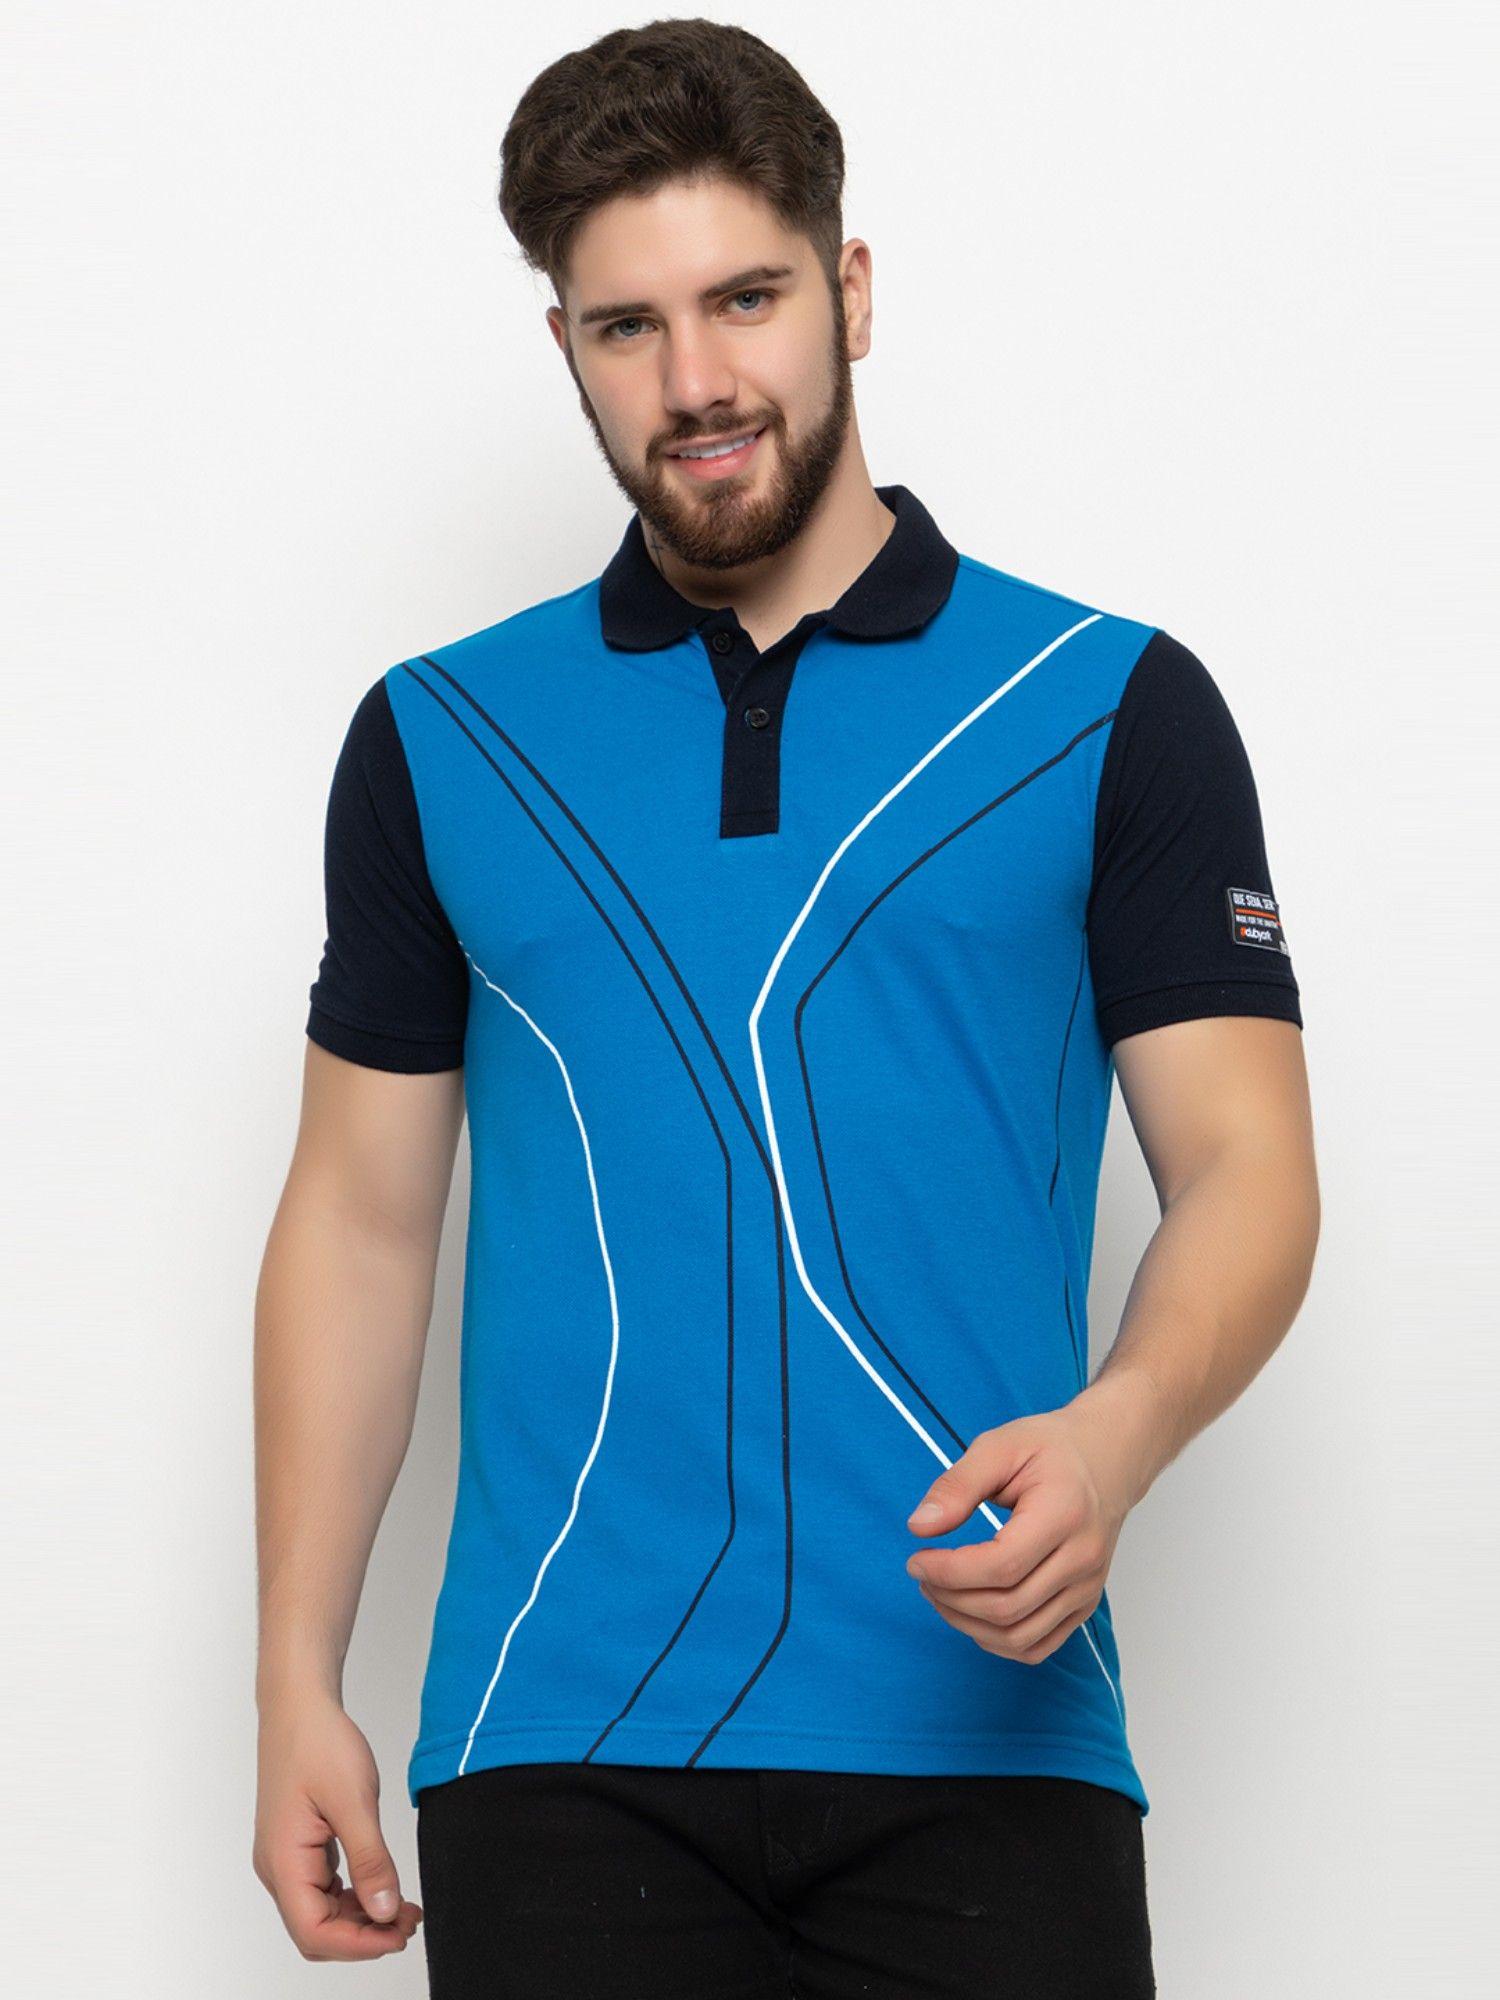 men teal blue colorblocked polo t-shirt